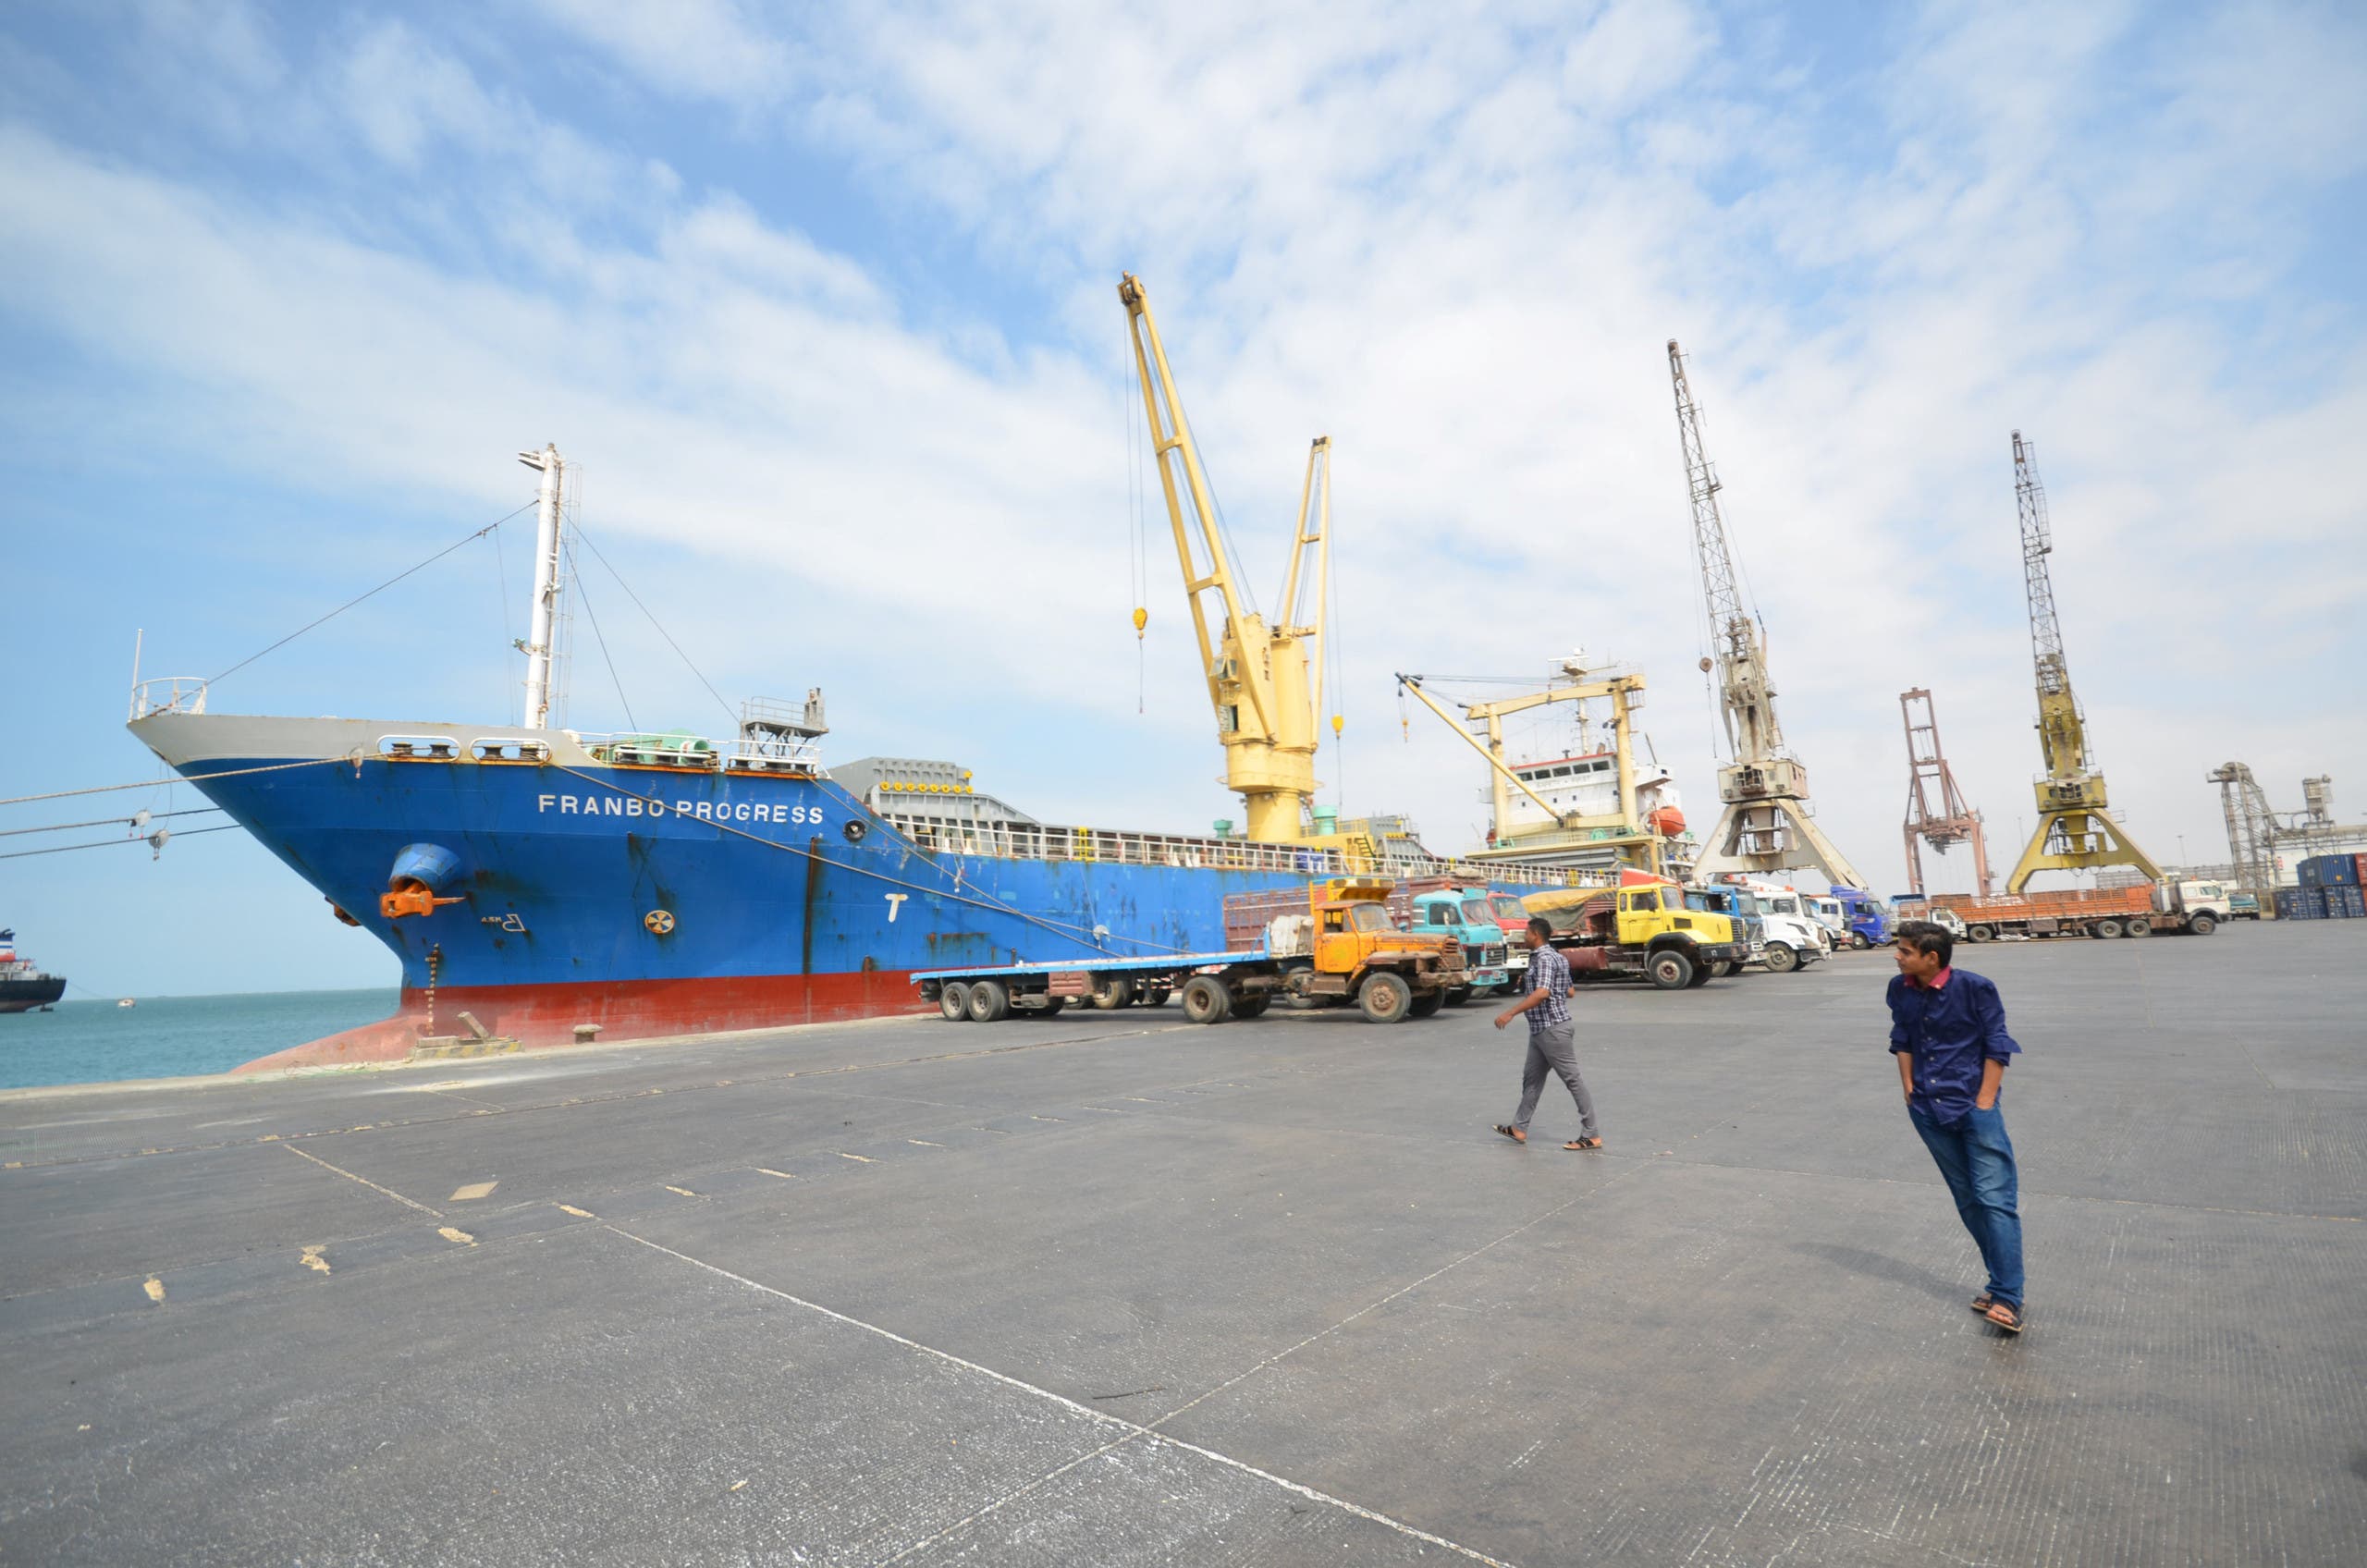 People walk past a ship ducked at the Red Sea port of Hodeidah, Yemen February 1, 2017